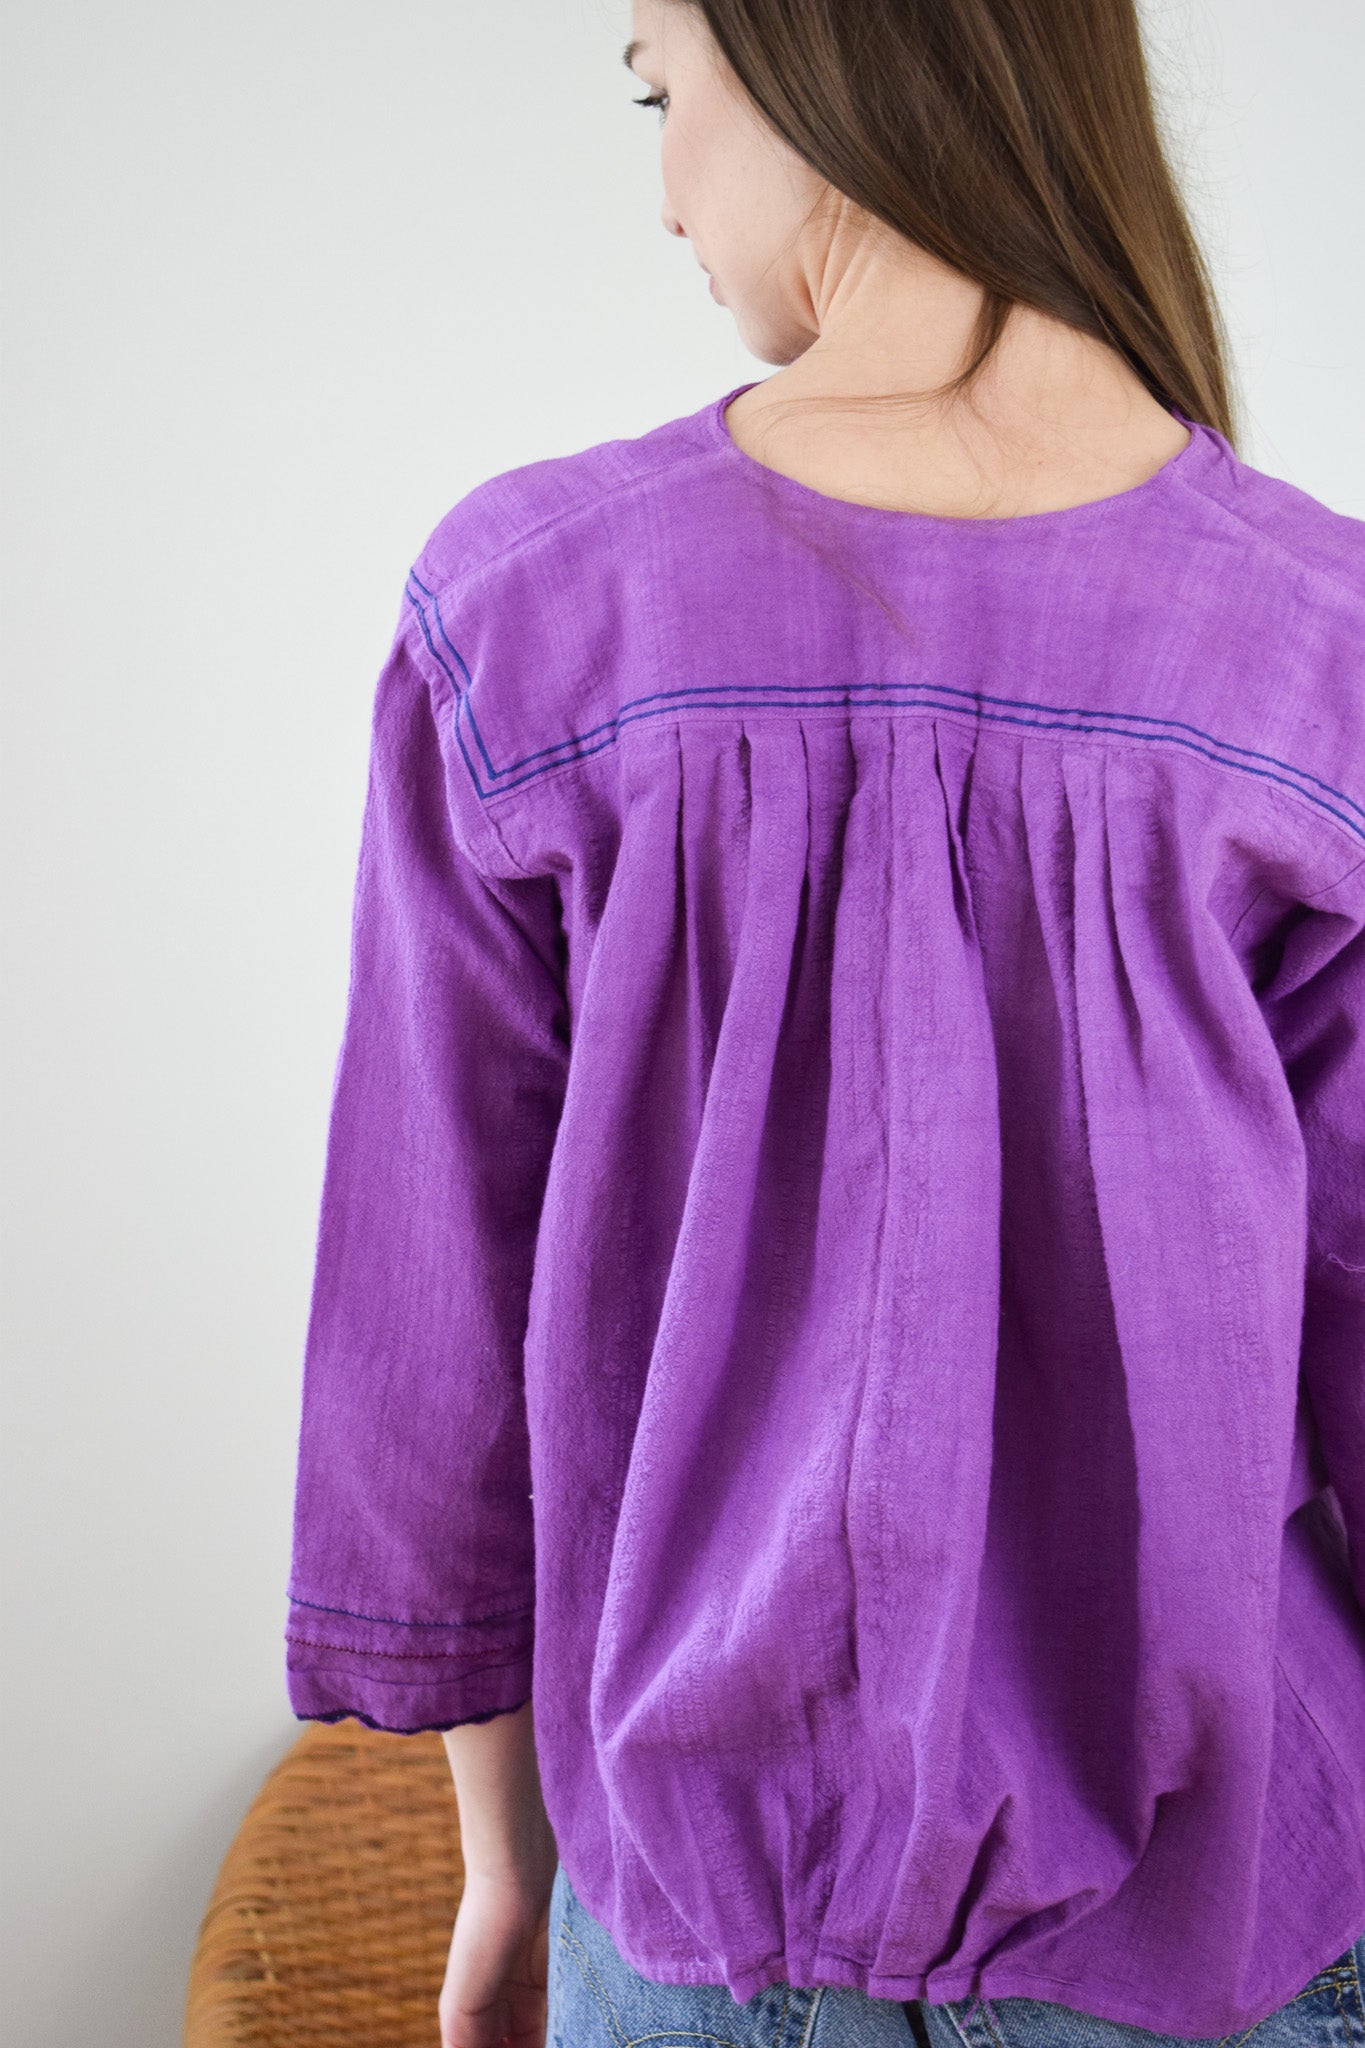 Vintage Overdyed Peasant Blouse | XS/S/M